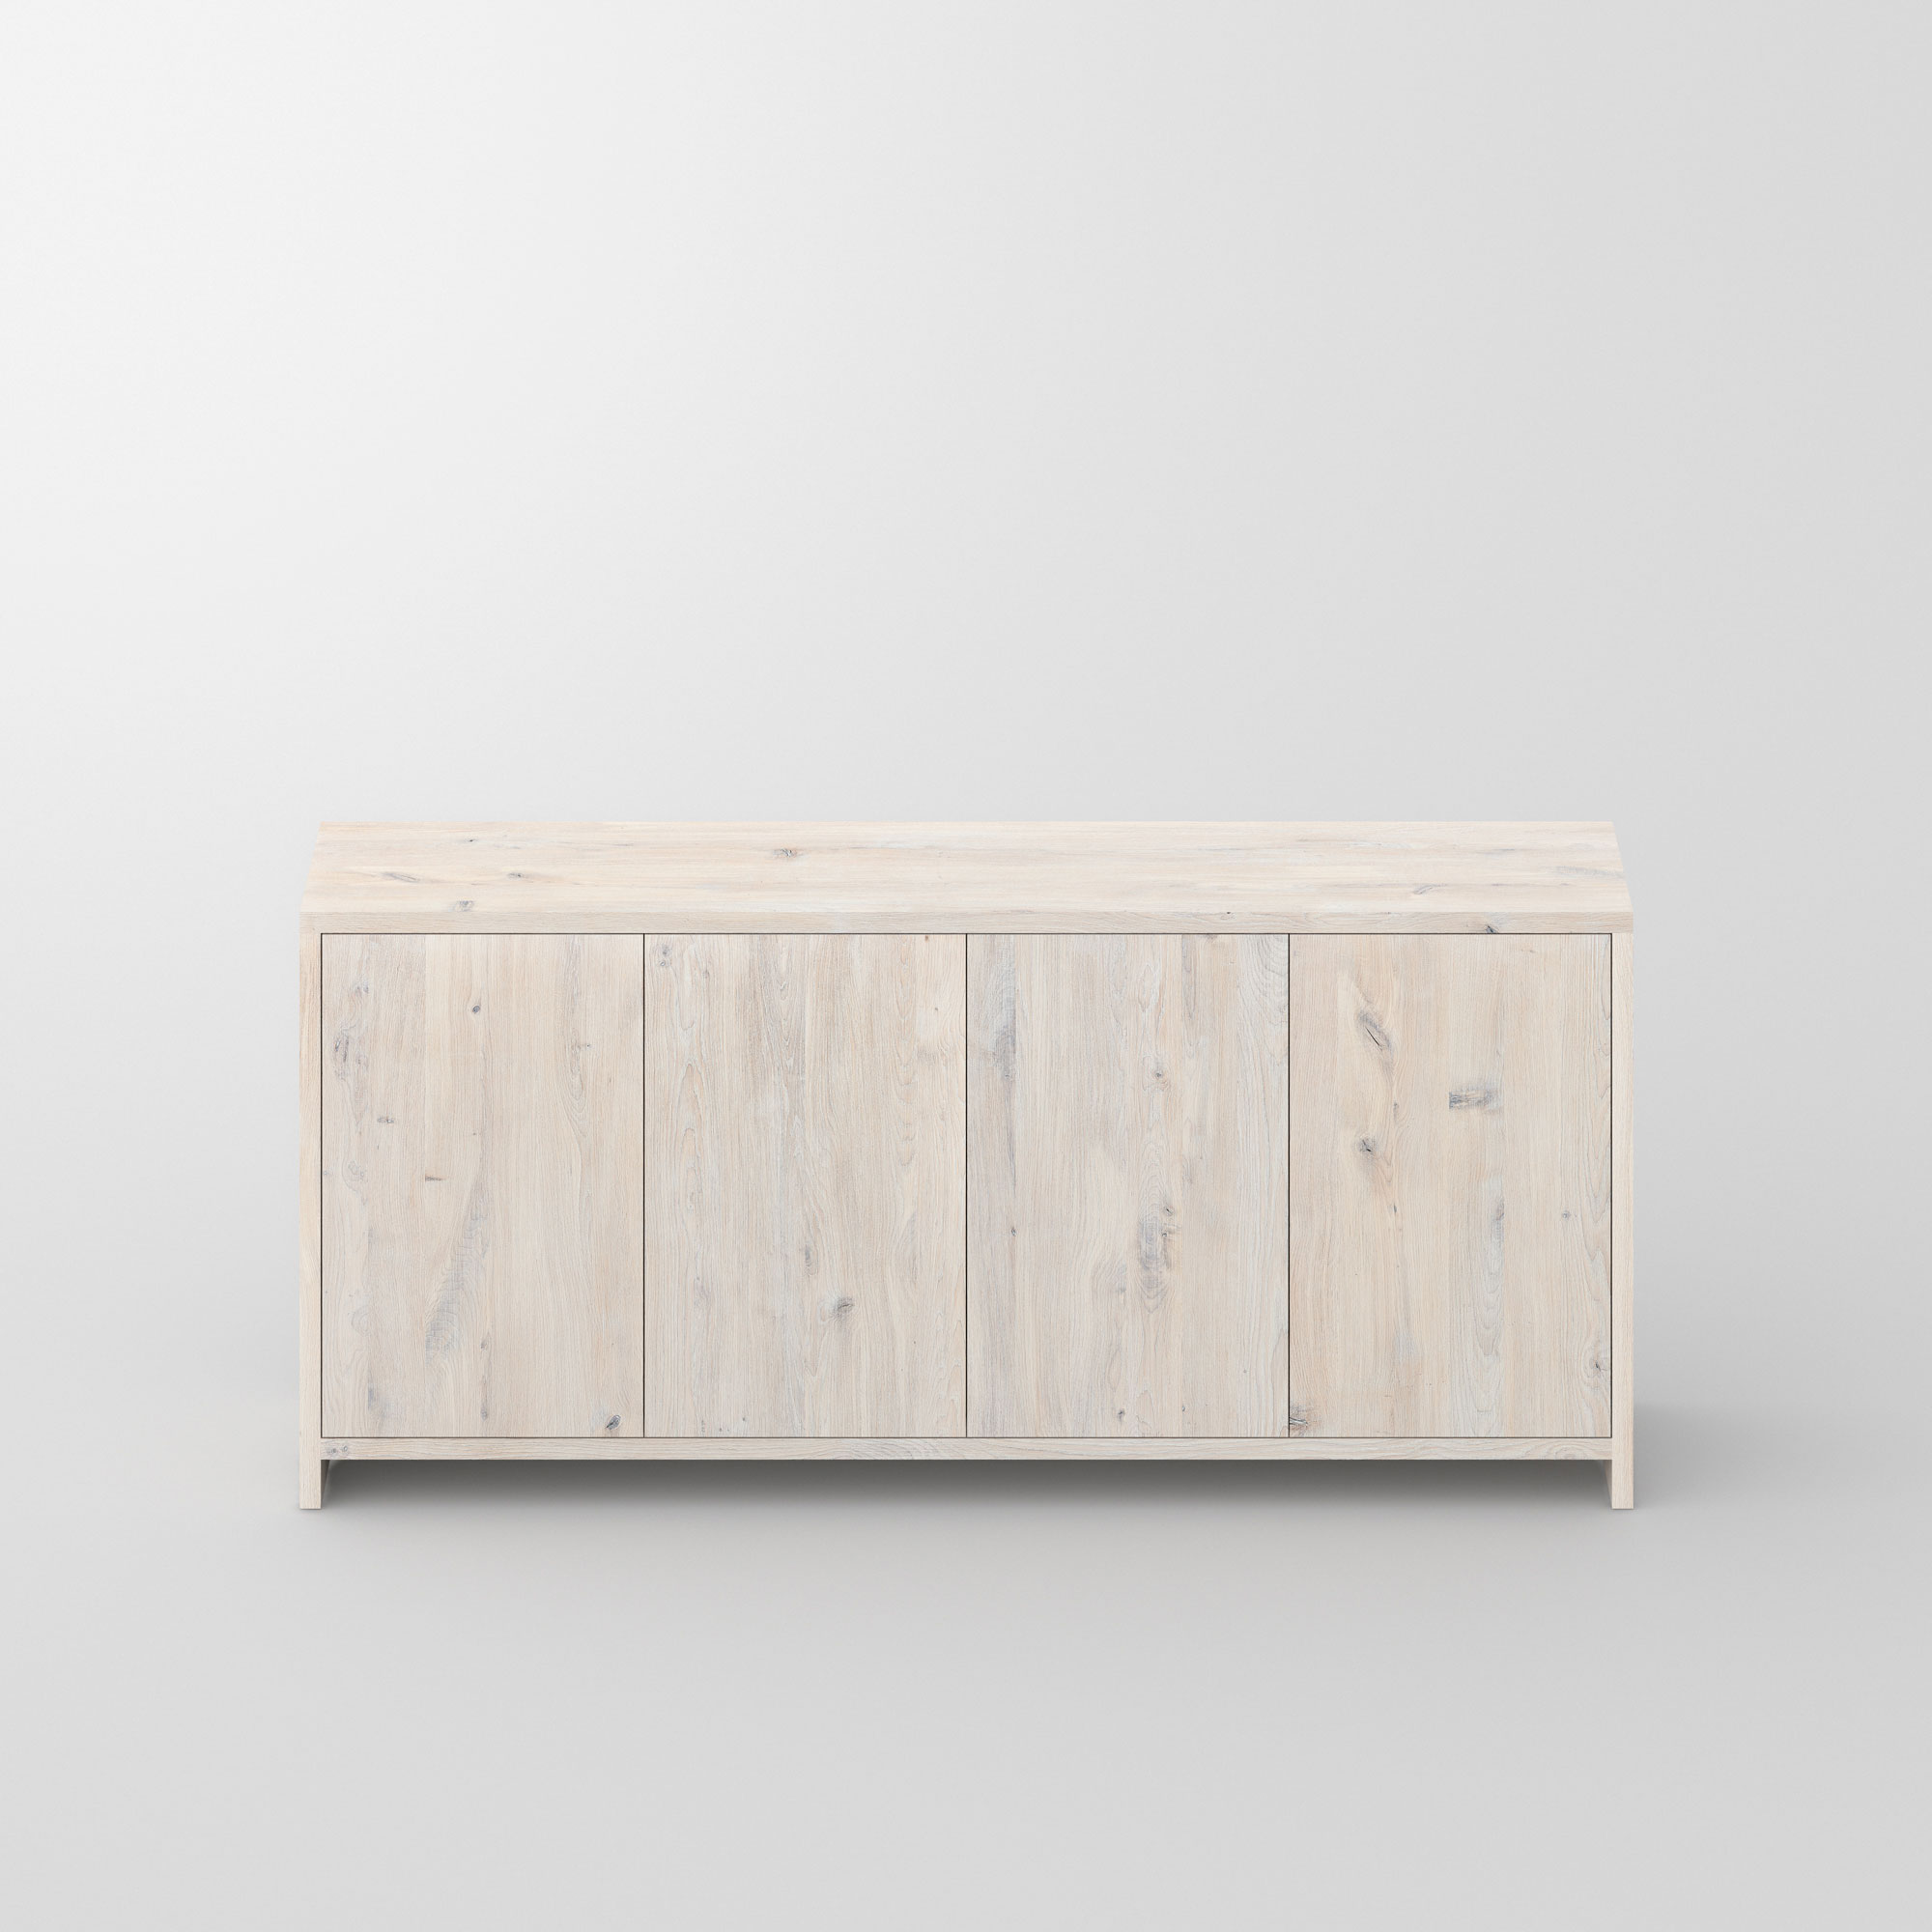 Tailor-Made Sideboard MENA F cam2 custom made in solid wood by vitamin design